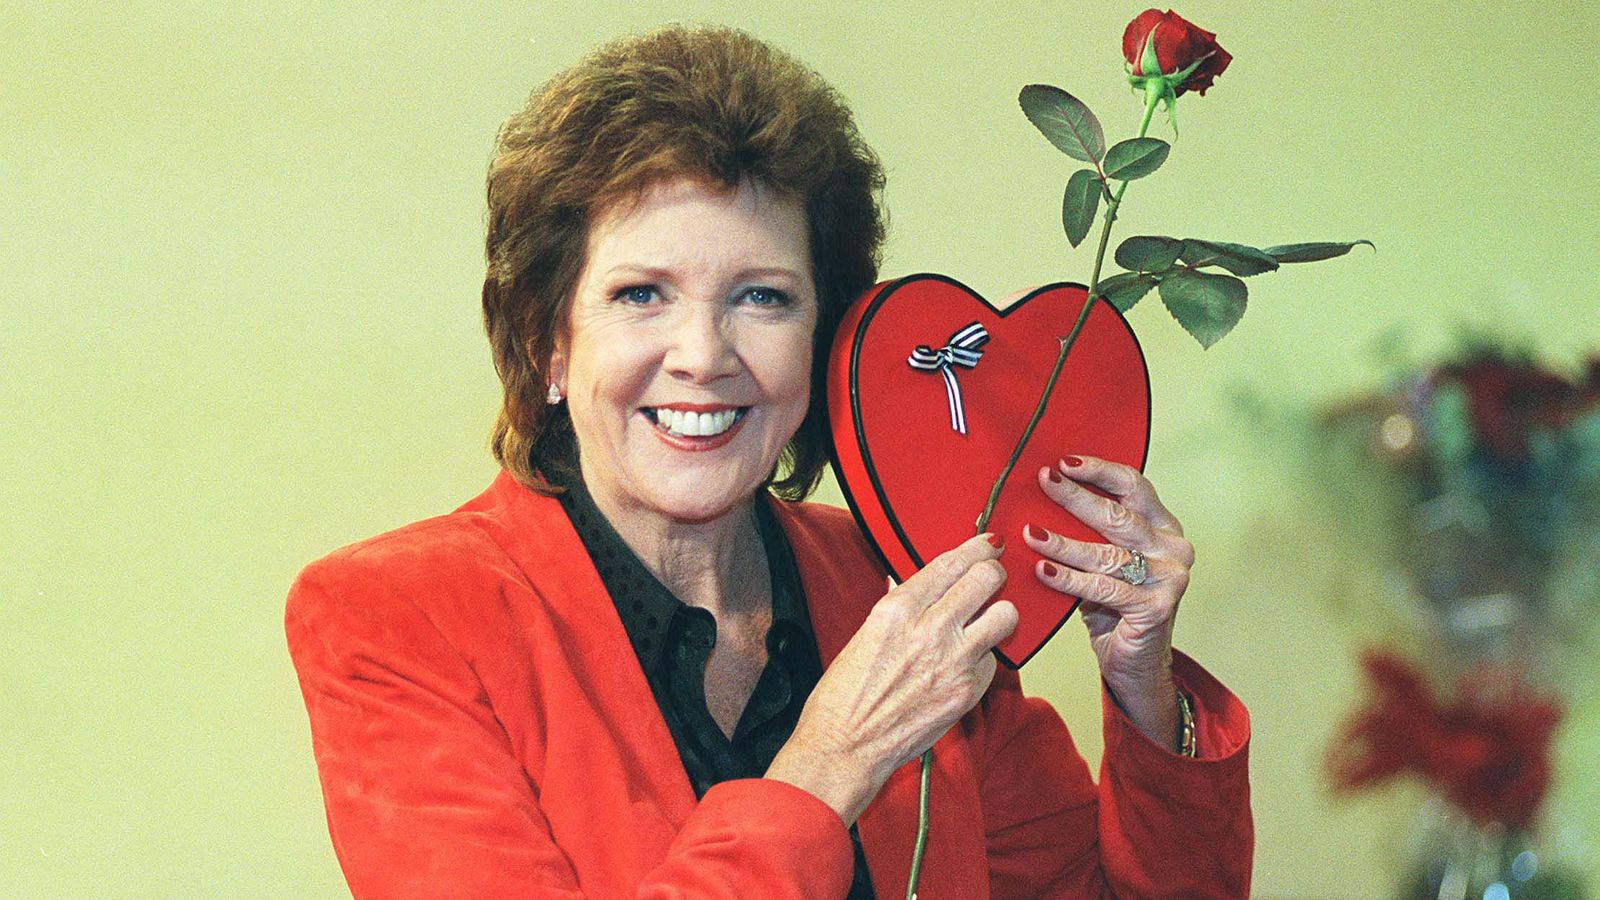 Cilla Black Time Machine Track To Be Released Five Years After Her Death Ents And Arts News